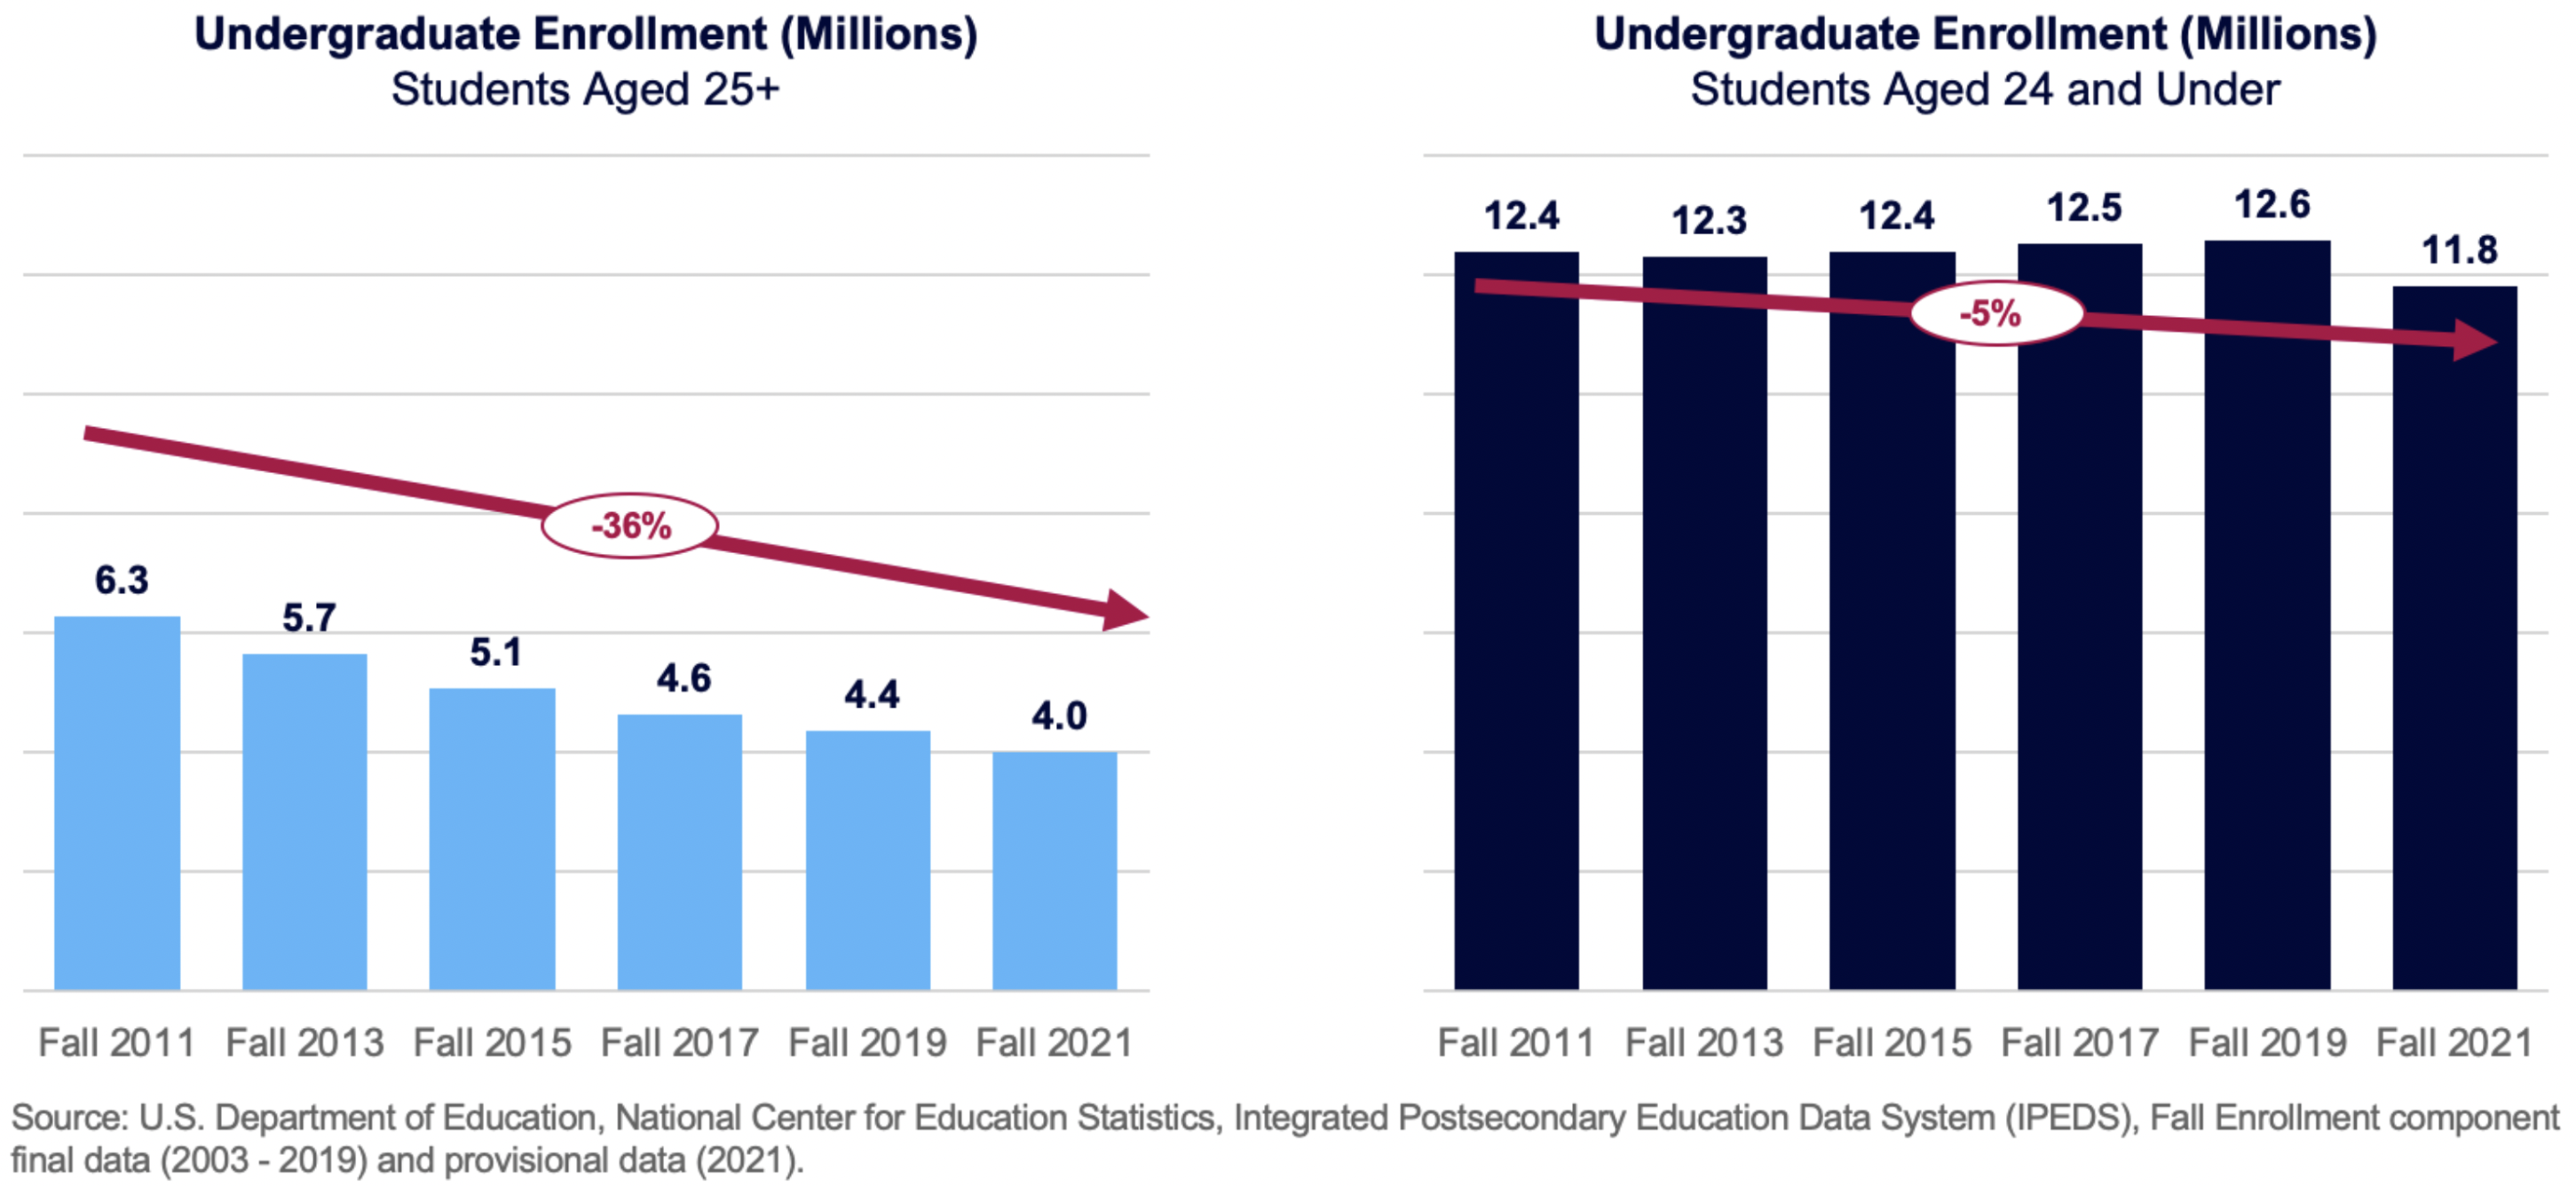 Enrollment from 2011 - 2021 (students aged 25+ and students aged 24 and under)